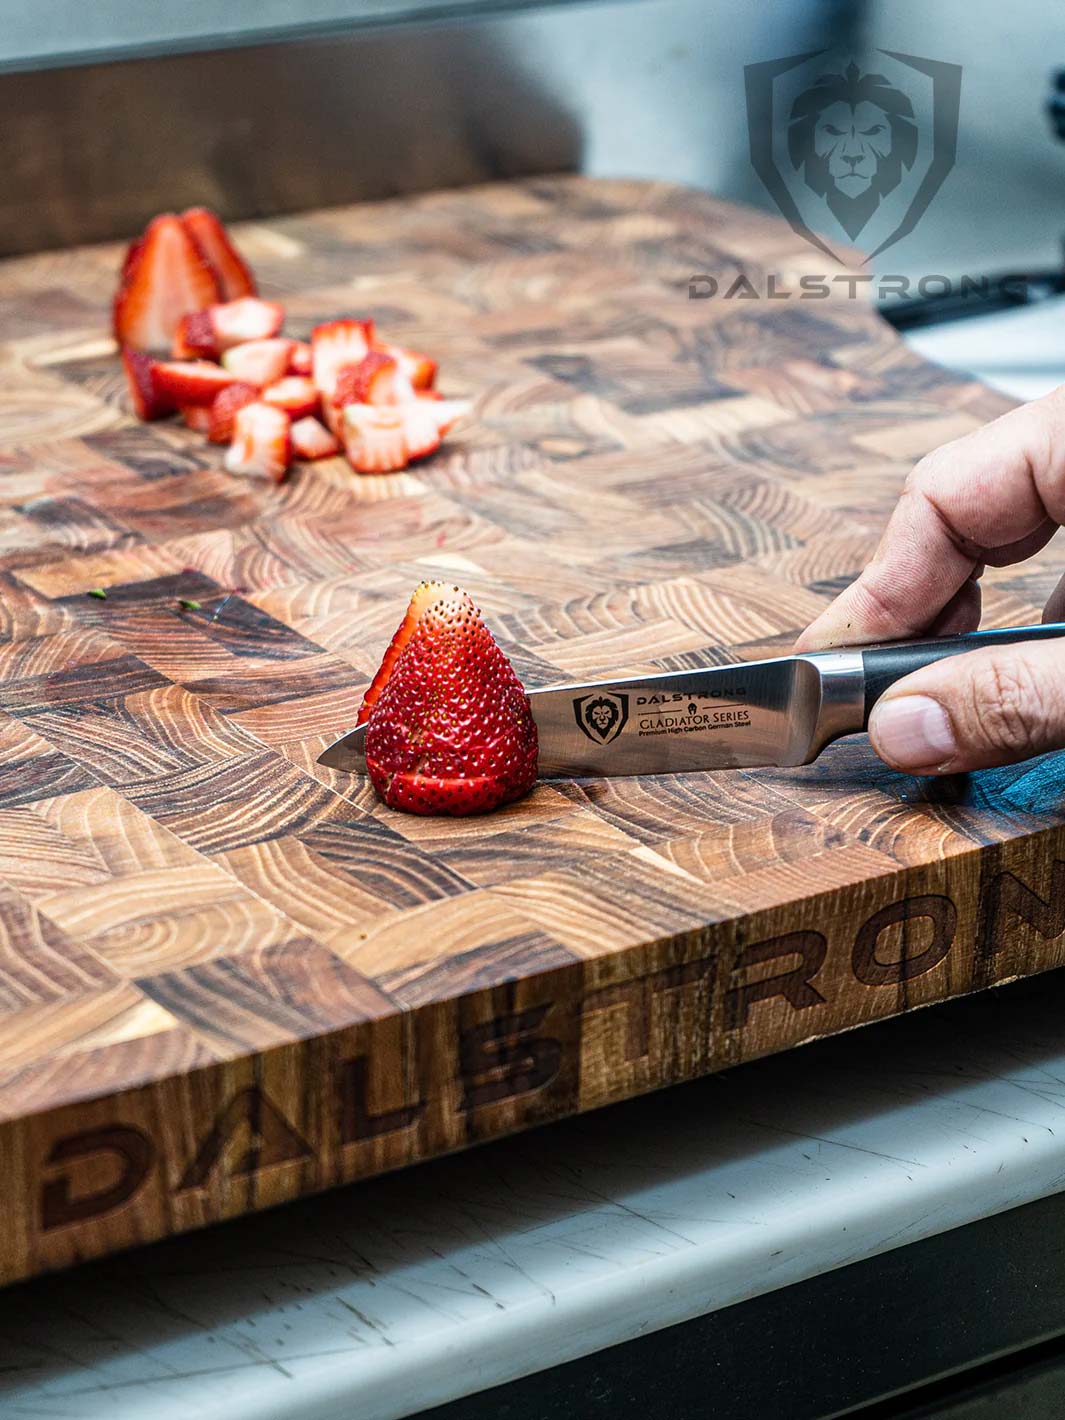 Dalstrong gladiator series 3 piece paring knife set with black handle and slices of strawberry on a dalstrong wooden cutting board.